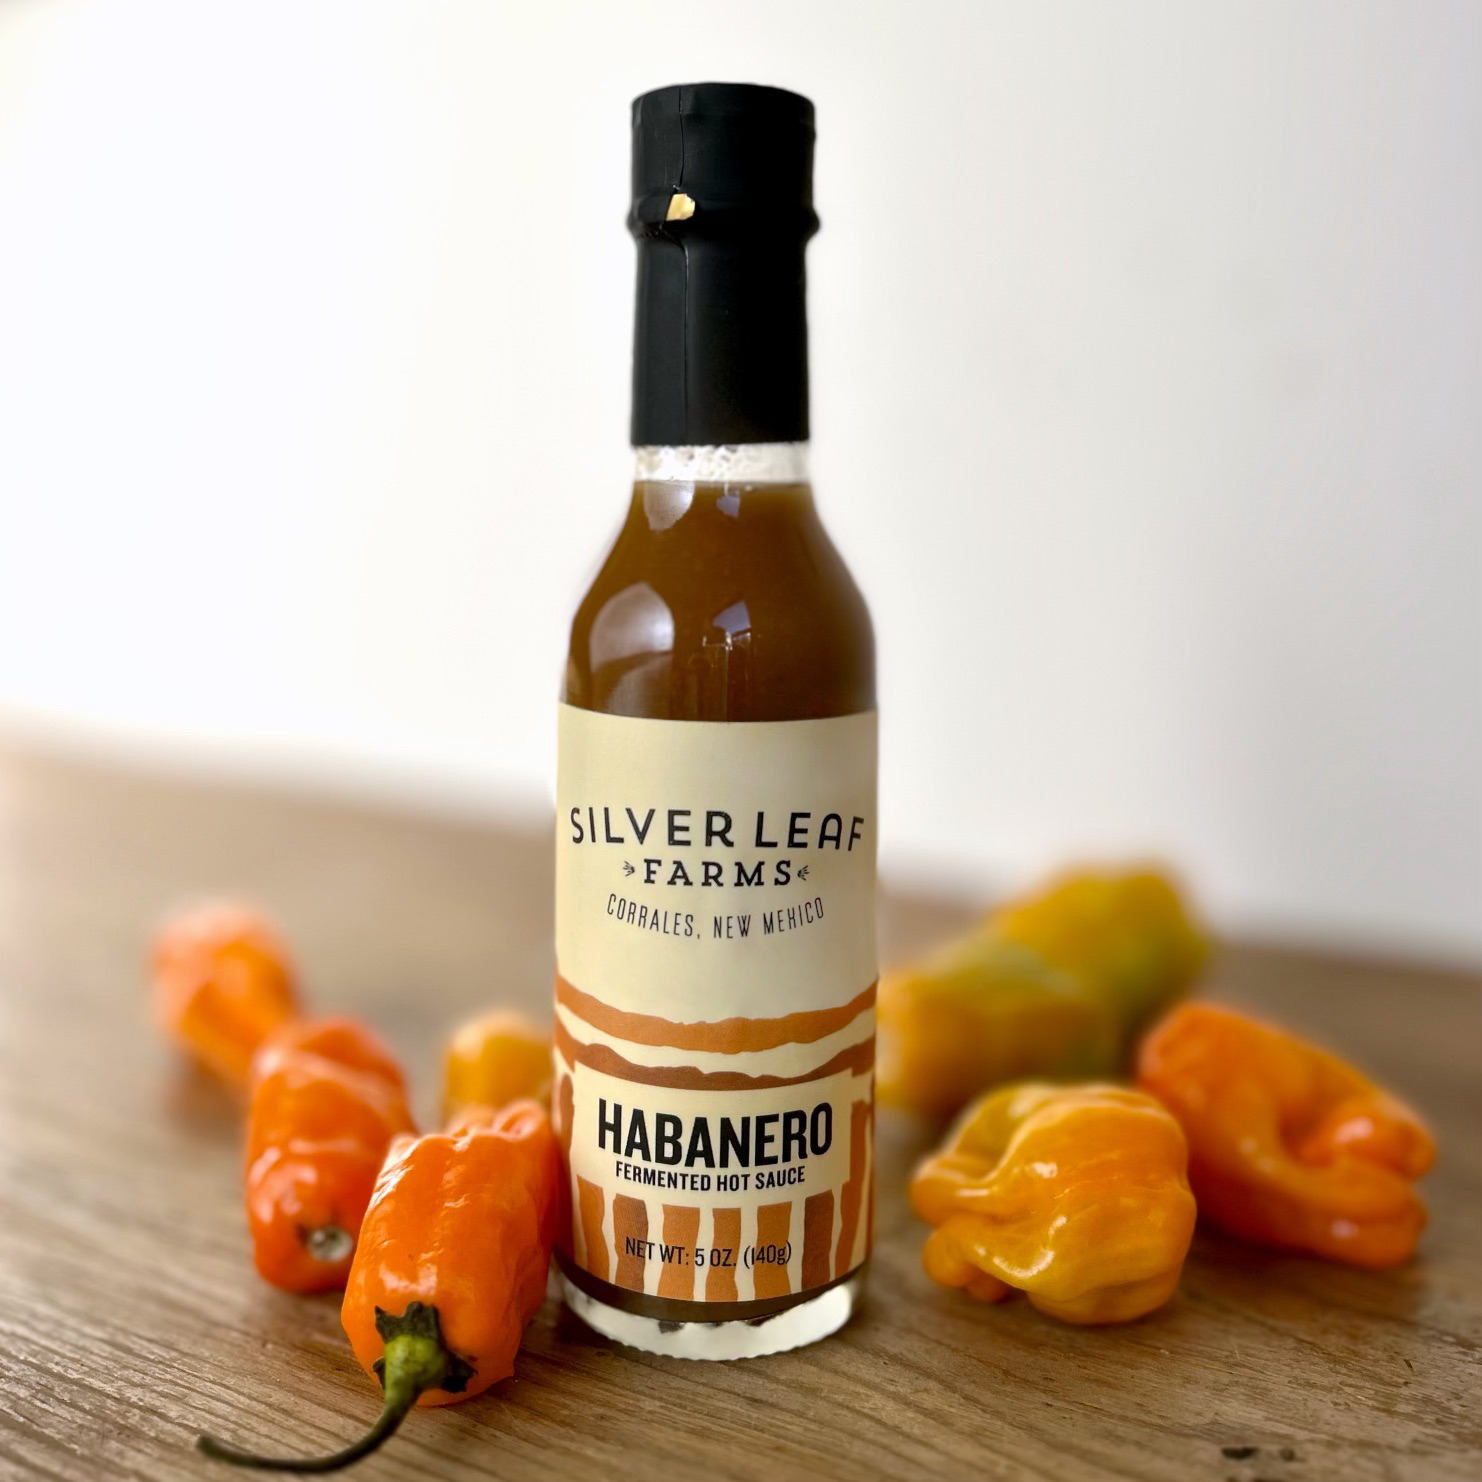 Silver Leaf Farms Habanero Fermented Hot Sauce bottle with habanero peppers